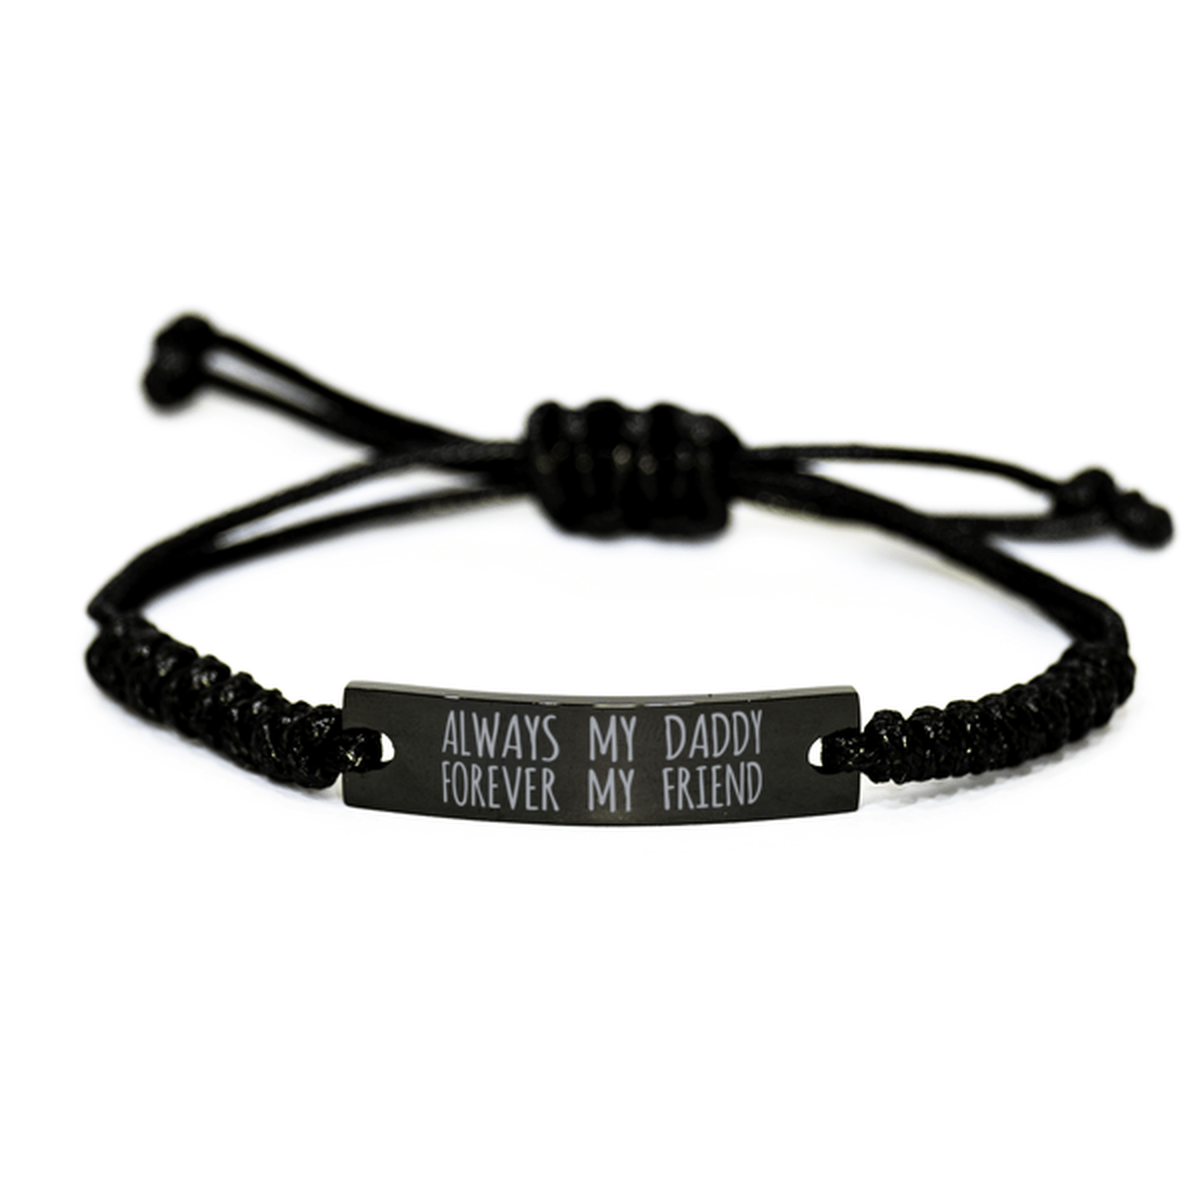 Inspirational Daddy Black Rope Bracelet, Always My Daddy Forever My Friend, Best Birthday Gifts For Family